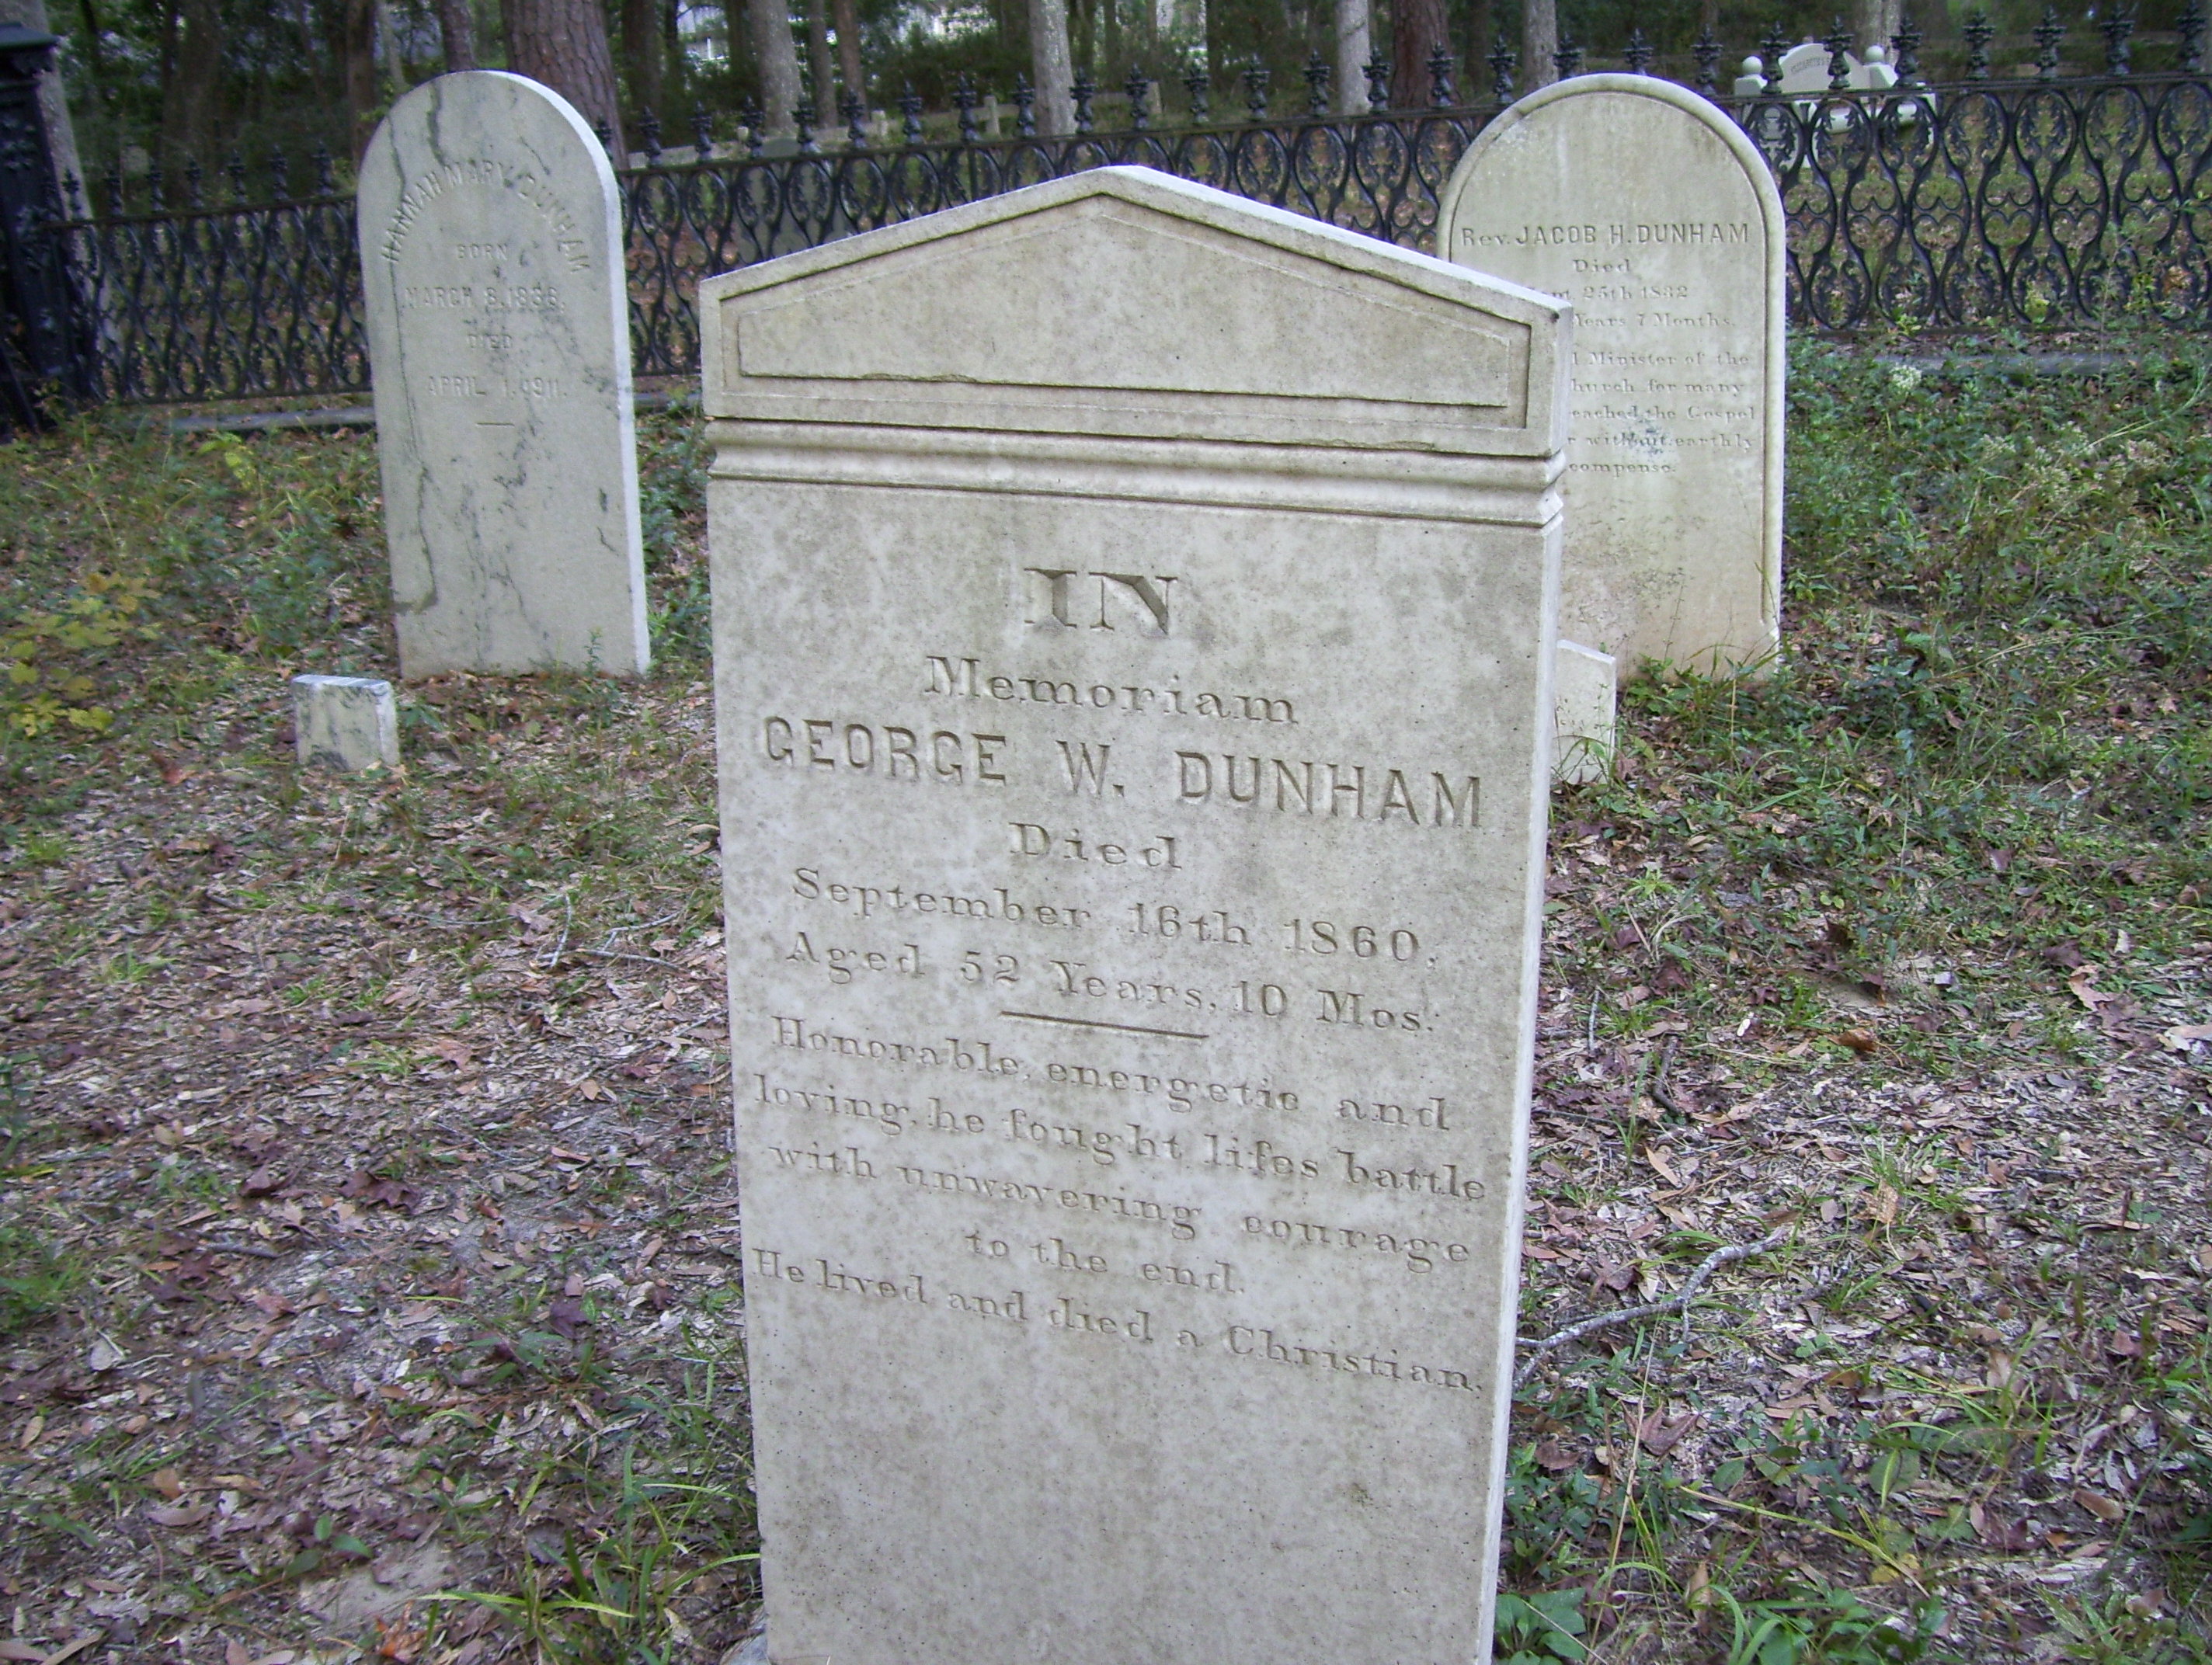  IN Memoriam GEORGE W. DUNHAM Died September 16th 1860. Aged 52 Years, 10 Mos. &mdash Honorable, energetic and loving, he fought lifes battle with unwavering courage to the end. He lived and died a Christian. 